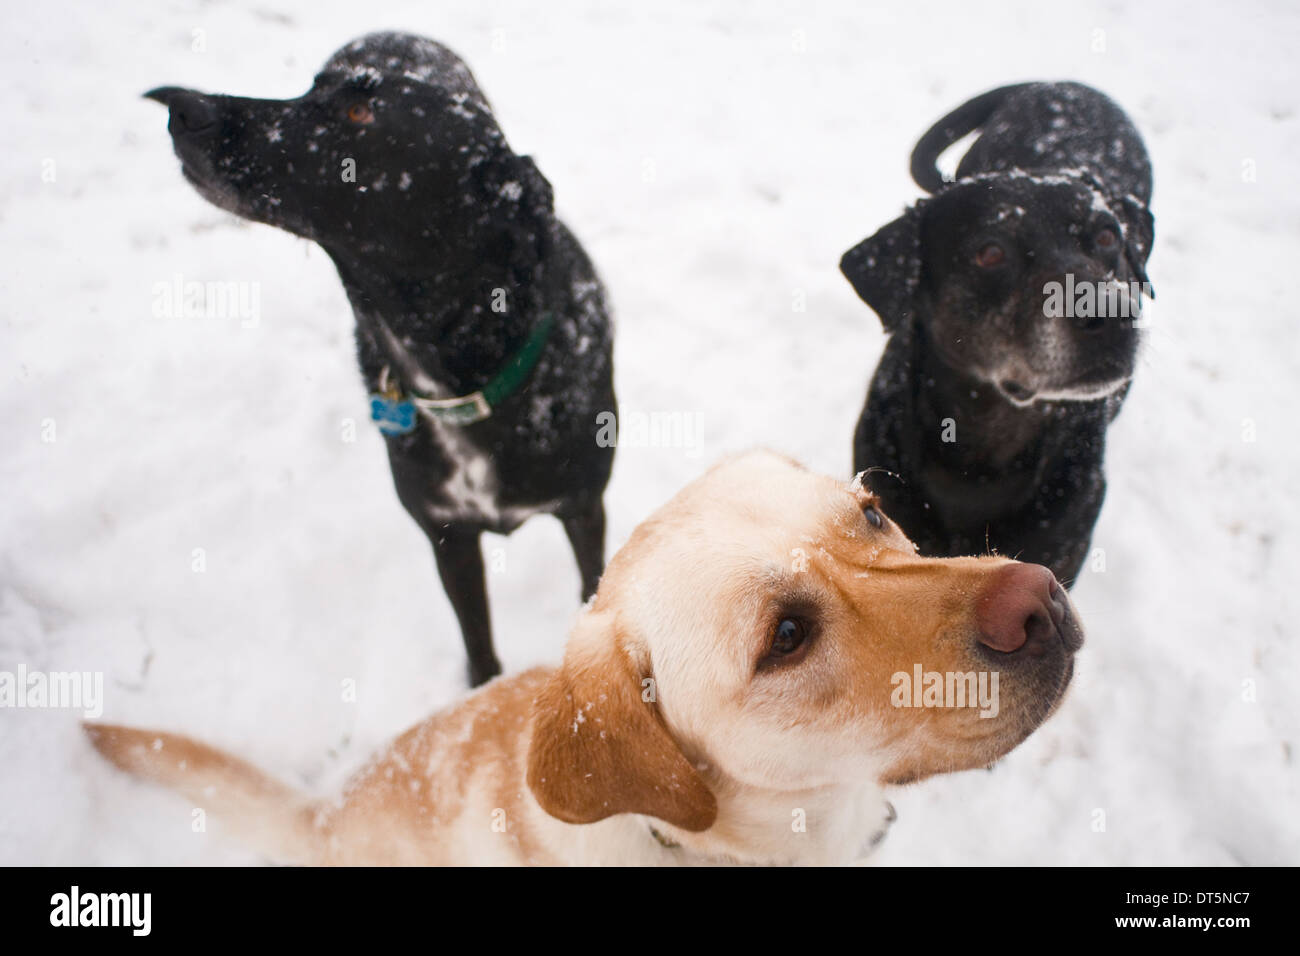 Three dogs, 2 female mixed-breed black dogs and 1 purebred yellow Labrador retriever, outside n the snow Stock Photo